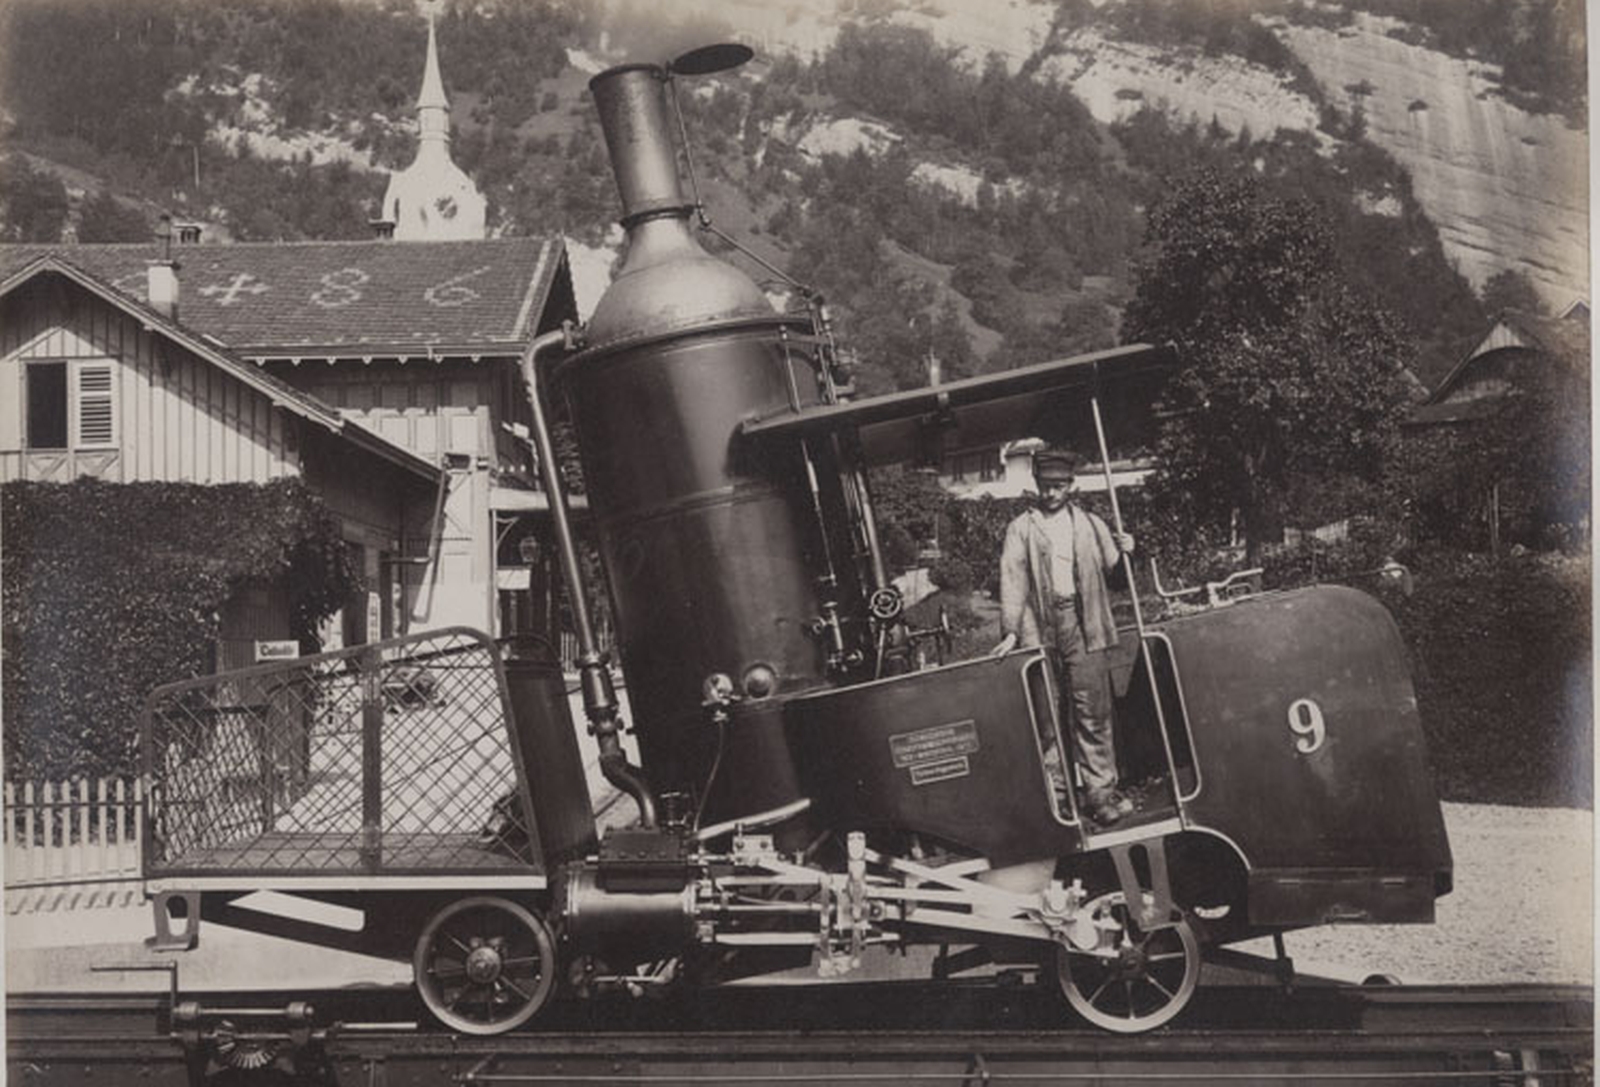 No. 9 in the original version with vertical boiler